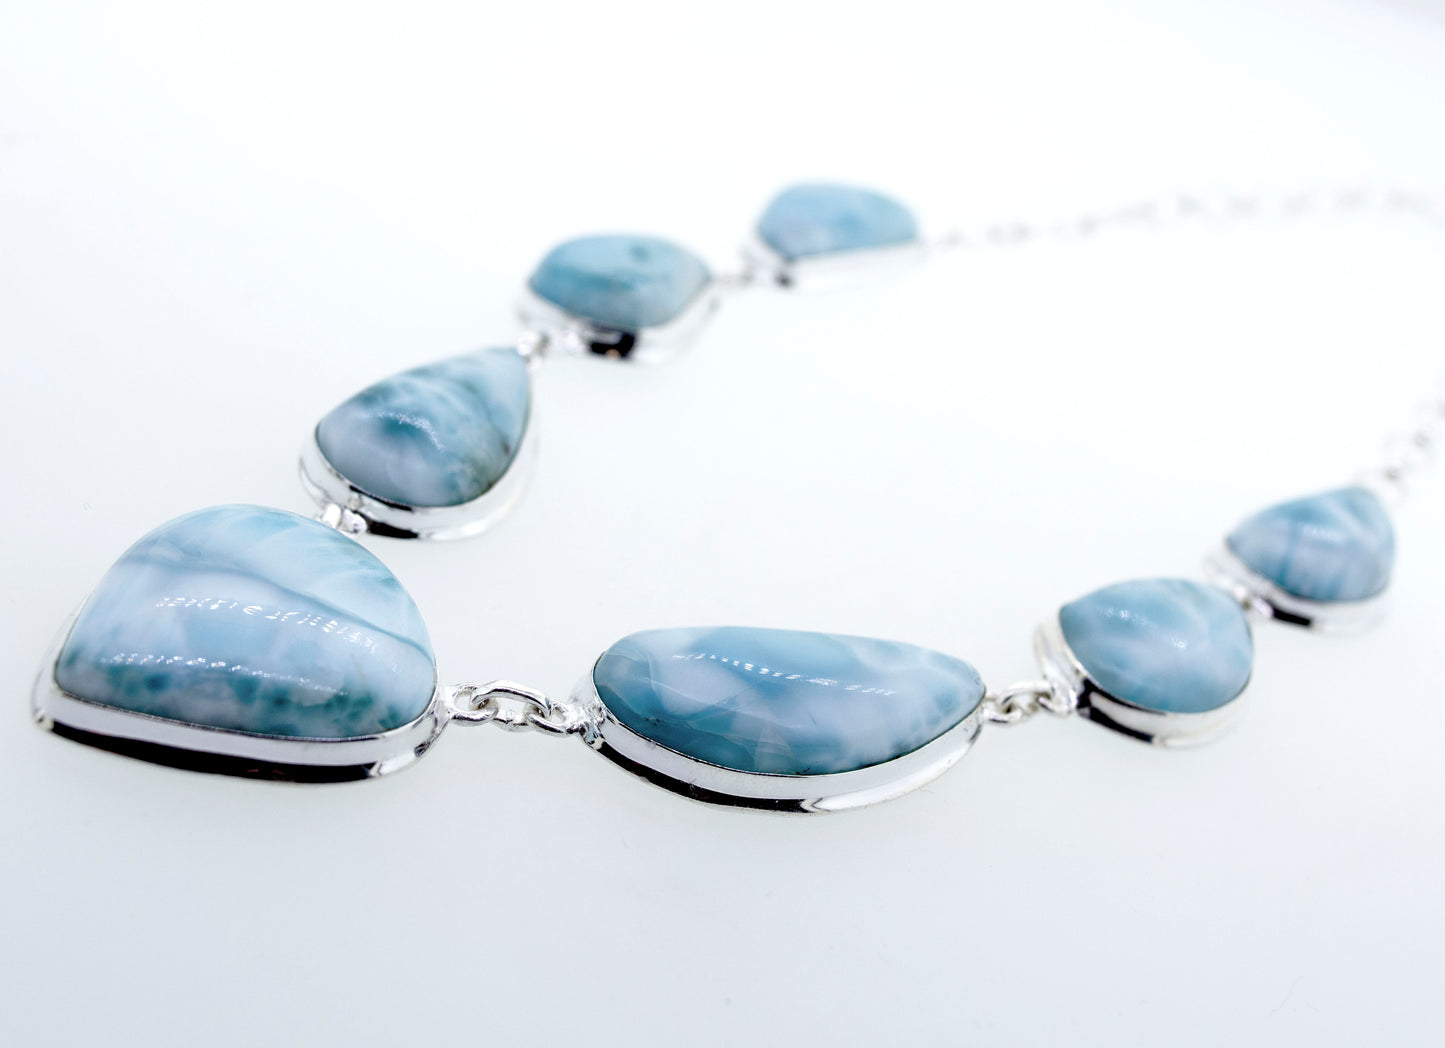 A beautiful Super Silver larimar necklace adorned with raw natural larimar stones in a teardrop shape on a white surface.